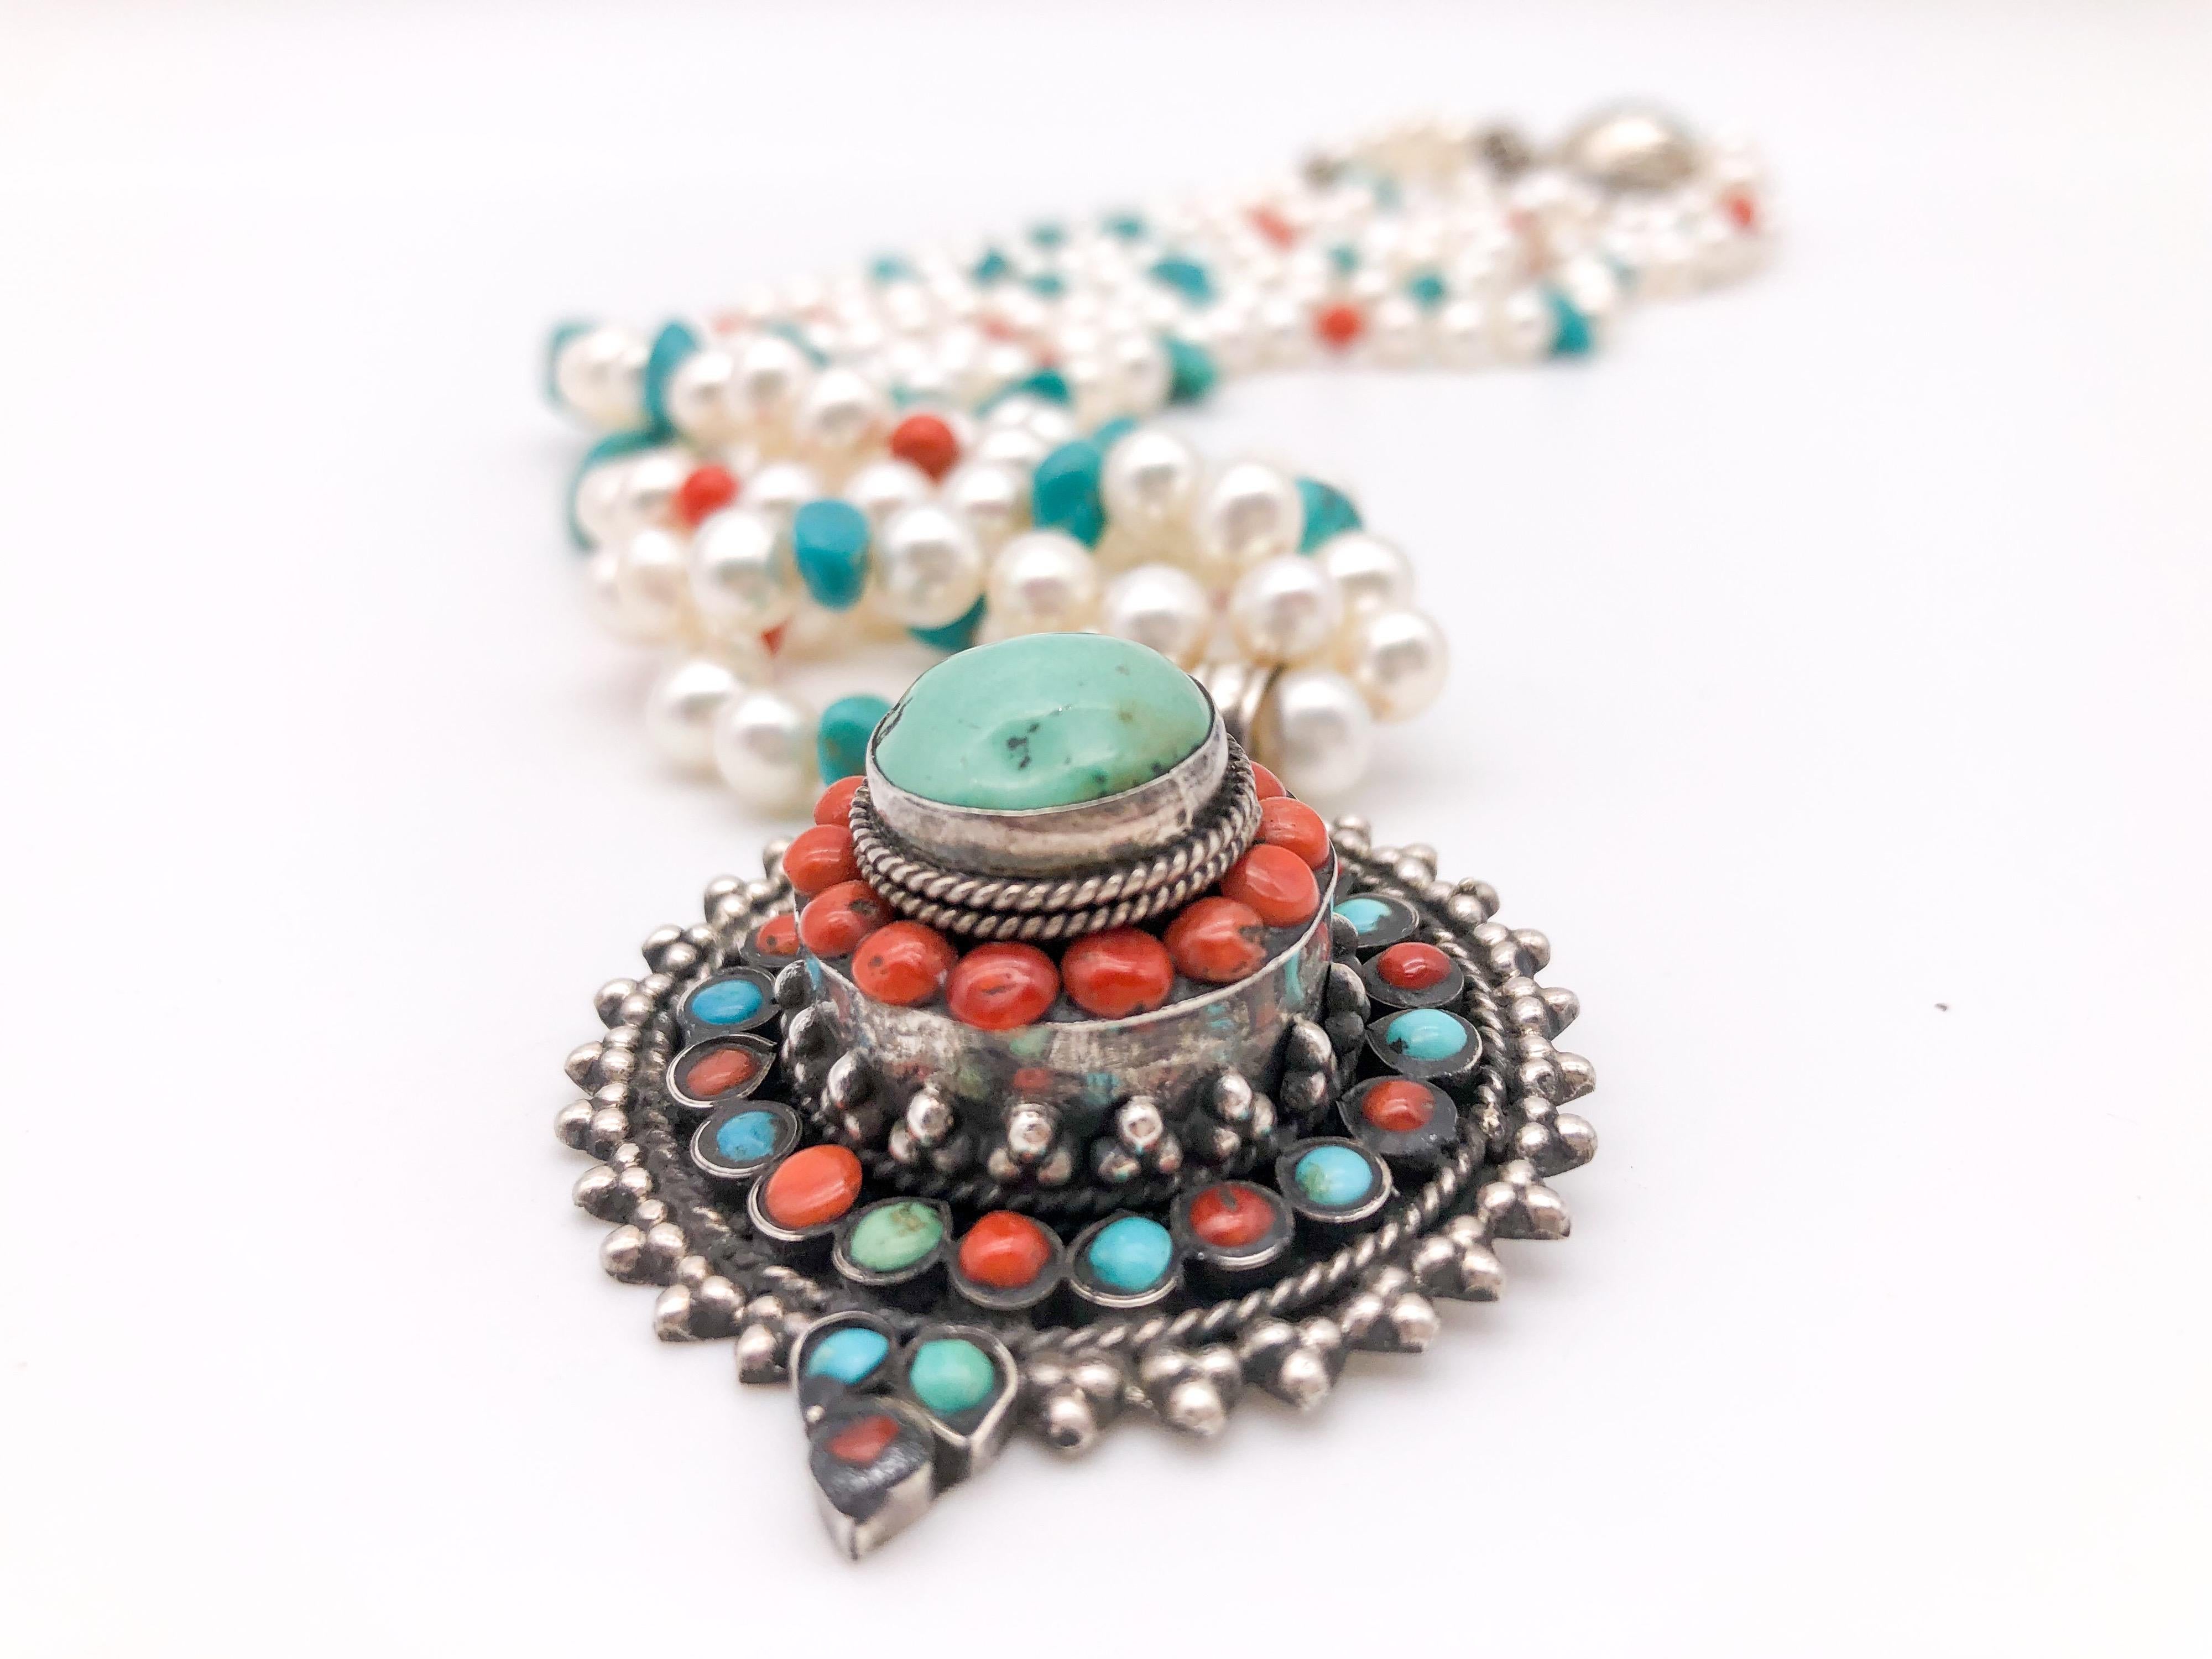 Contemporary A.Jeschel Freshwater Pearls with Vintage Tibetan Turquoise pendant For Sale